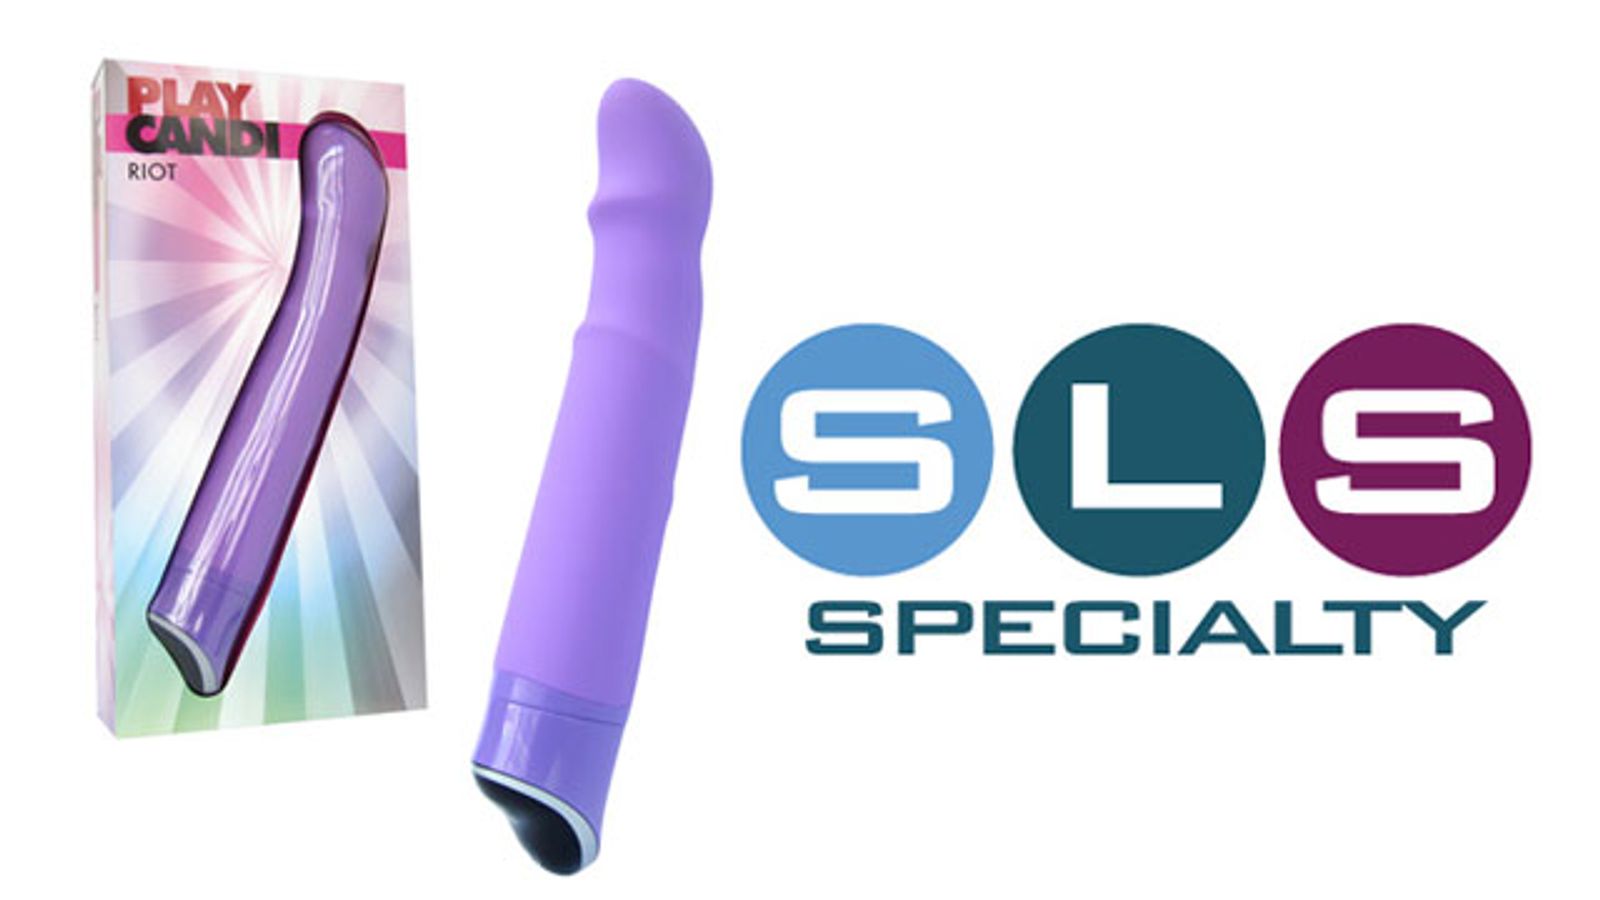 SLS Specialty Debuts Play Candi Collection of Massagers, Rings, More